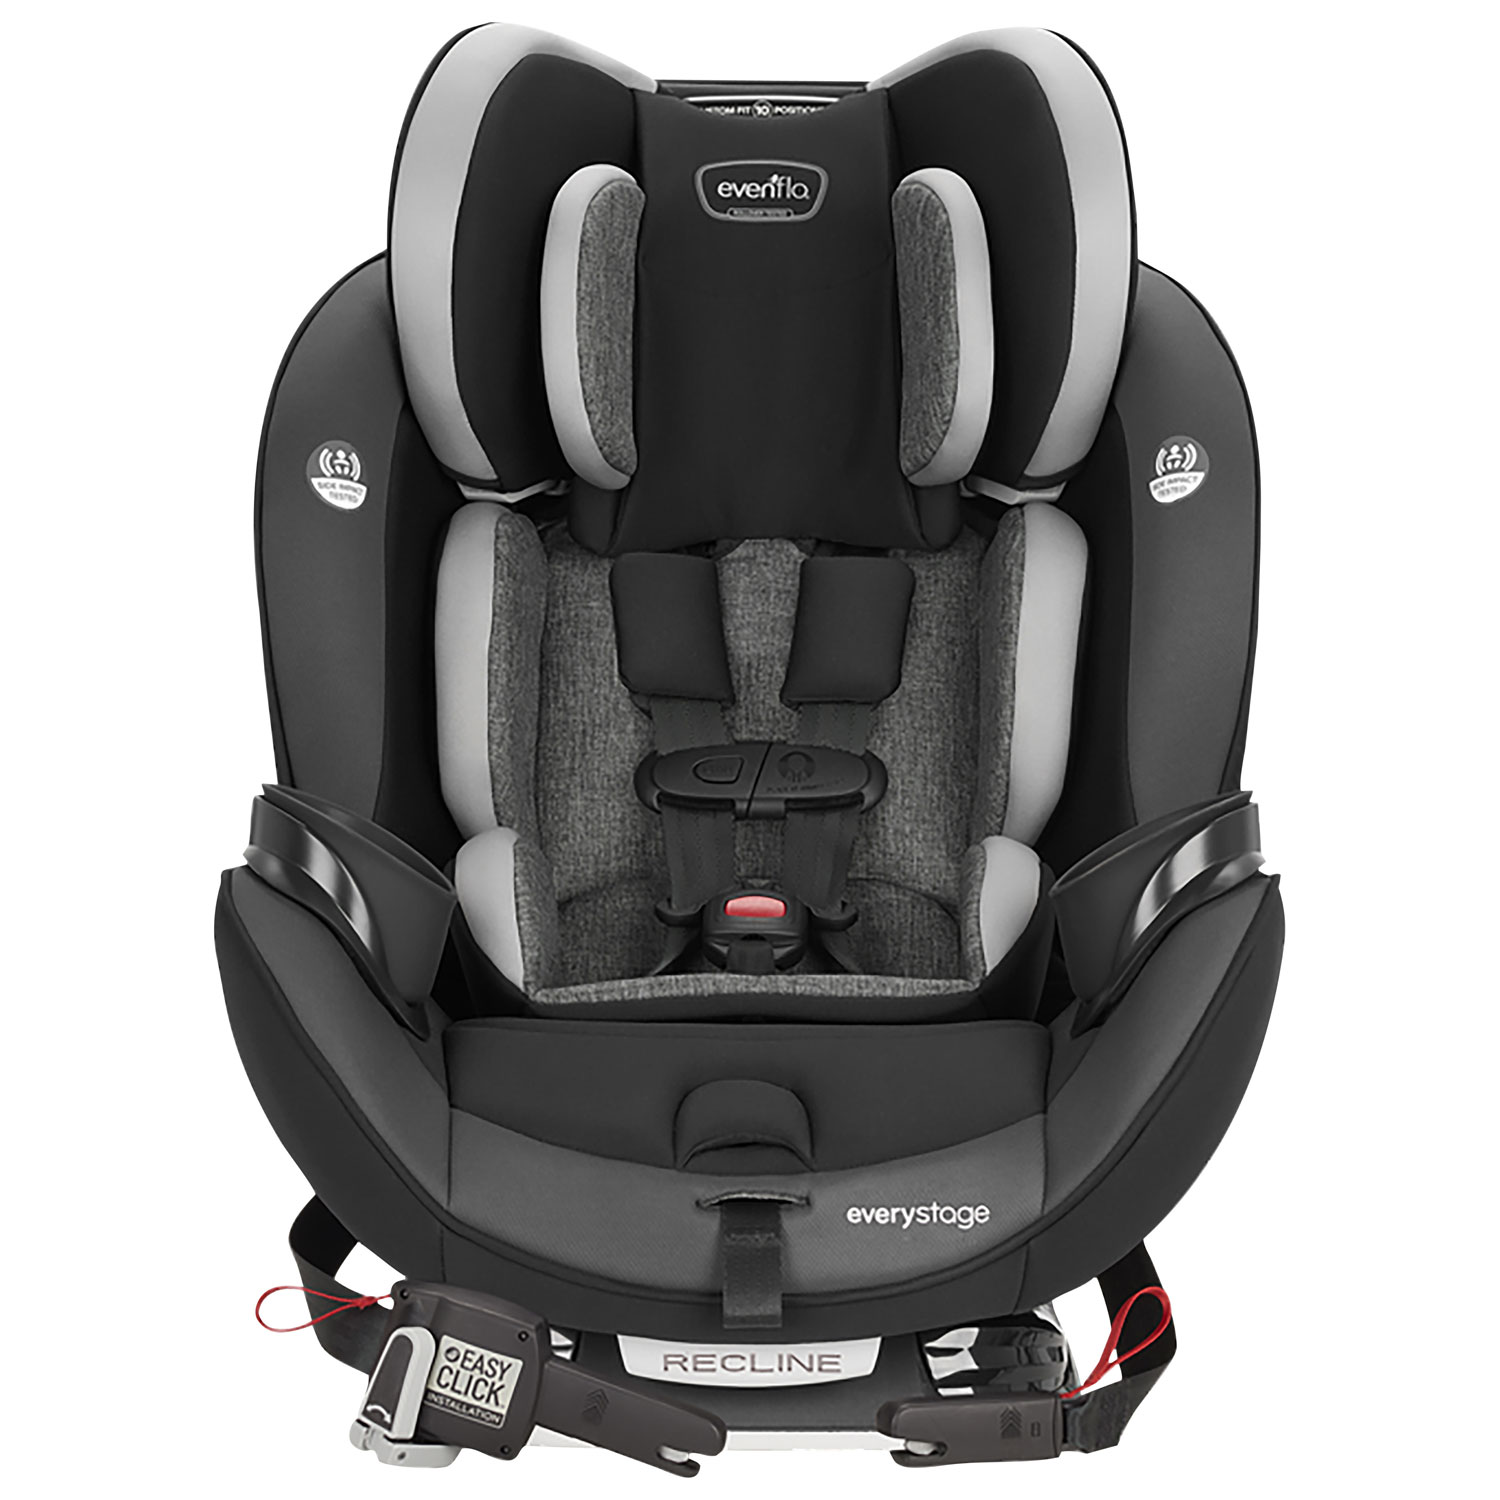 Evenflo Everystage Deluxe Convertible 3-in-1 Car Seat - Crestland